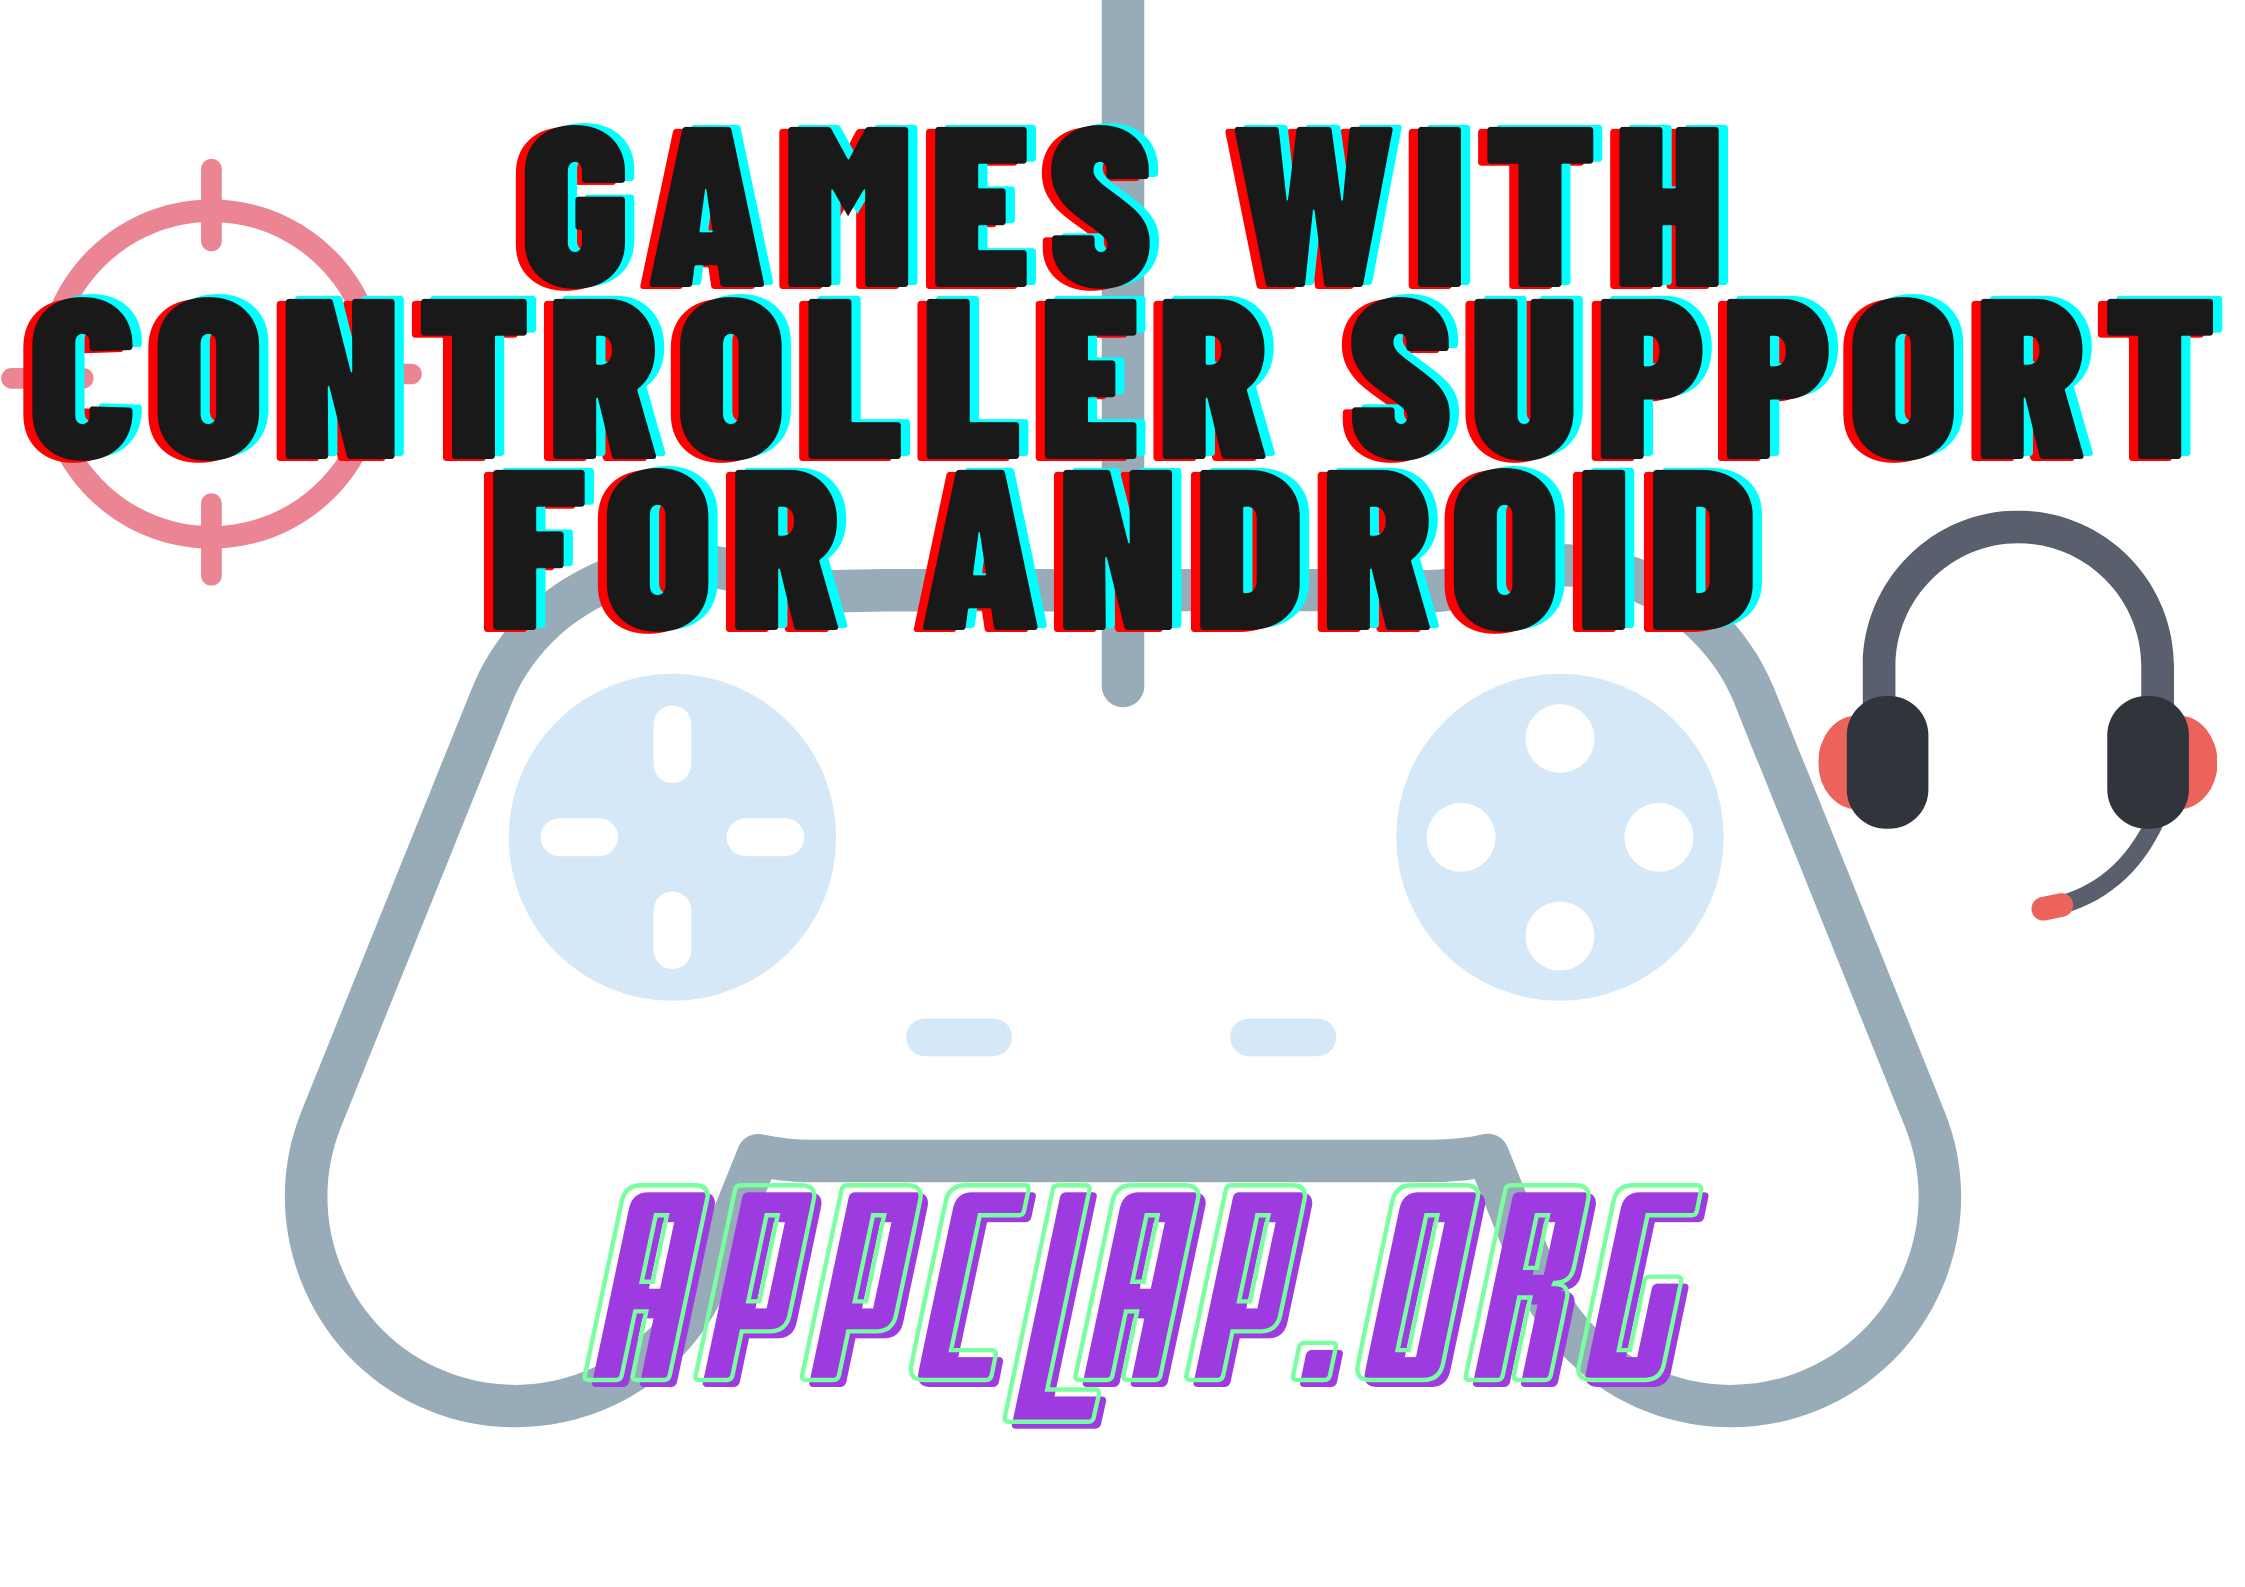 Games with Controller Support for Android